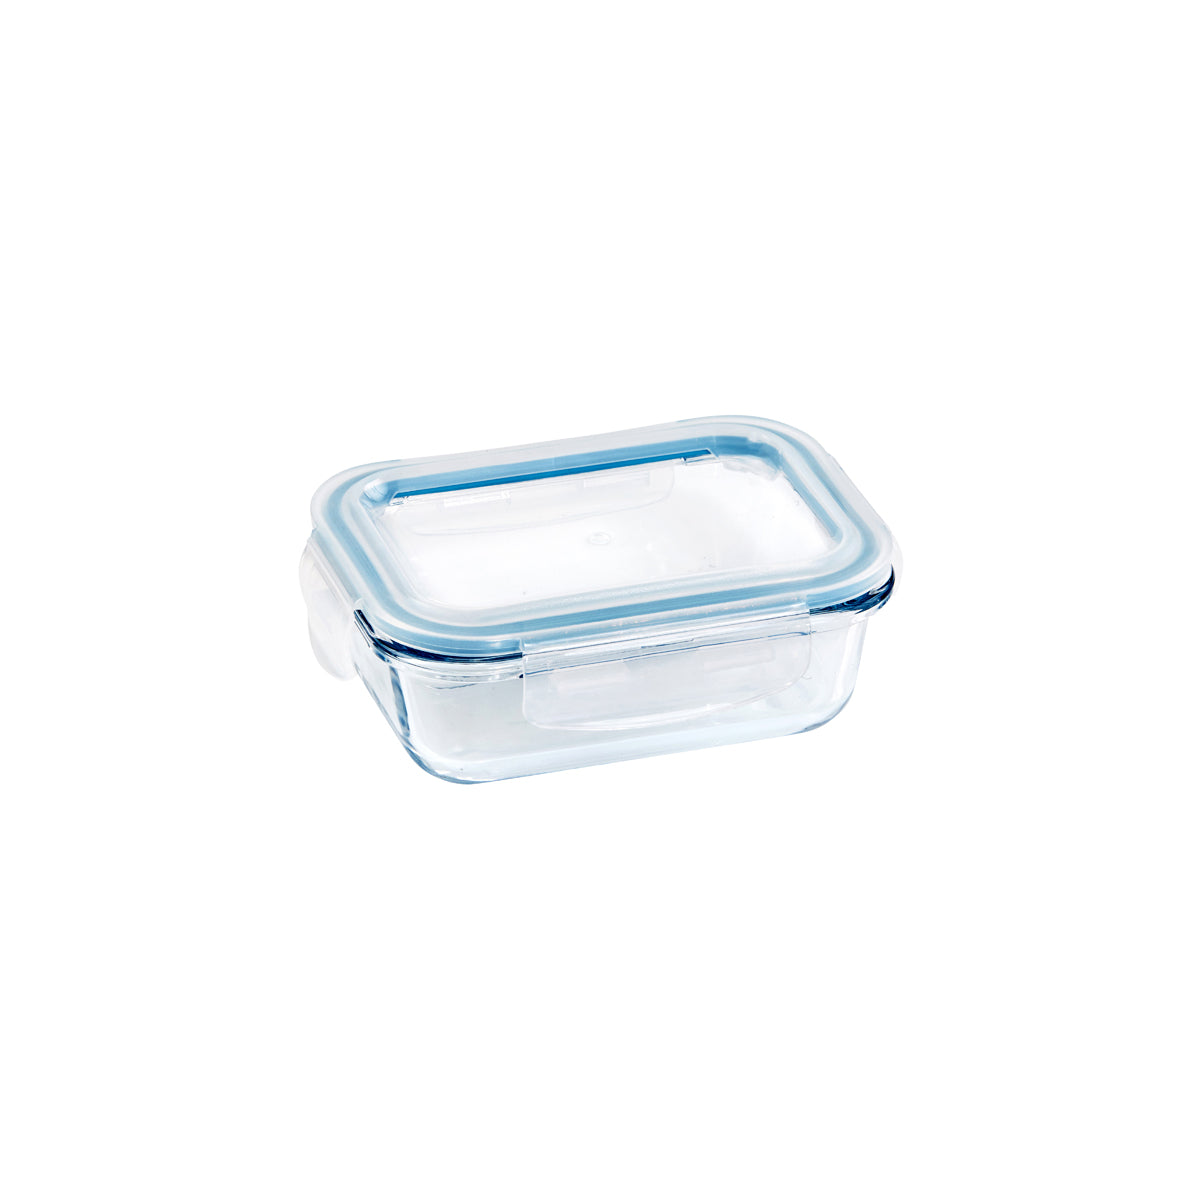 WLT48170 Wiltshire Rectangular Glass Container 370ml Tomkin Australia Hospitality Supplies